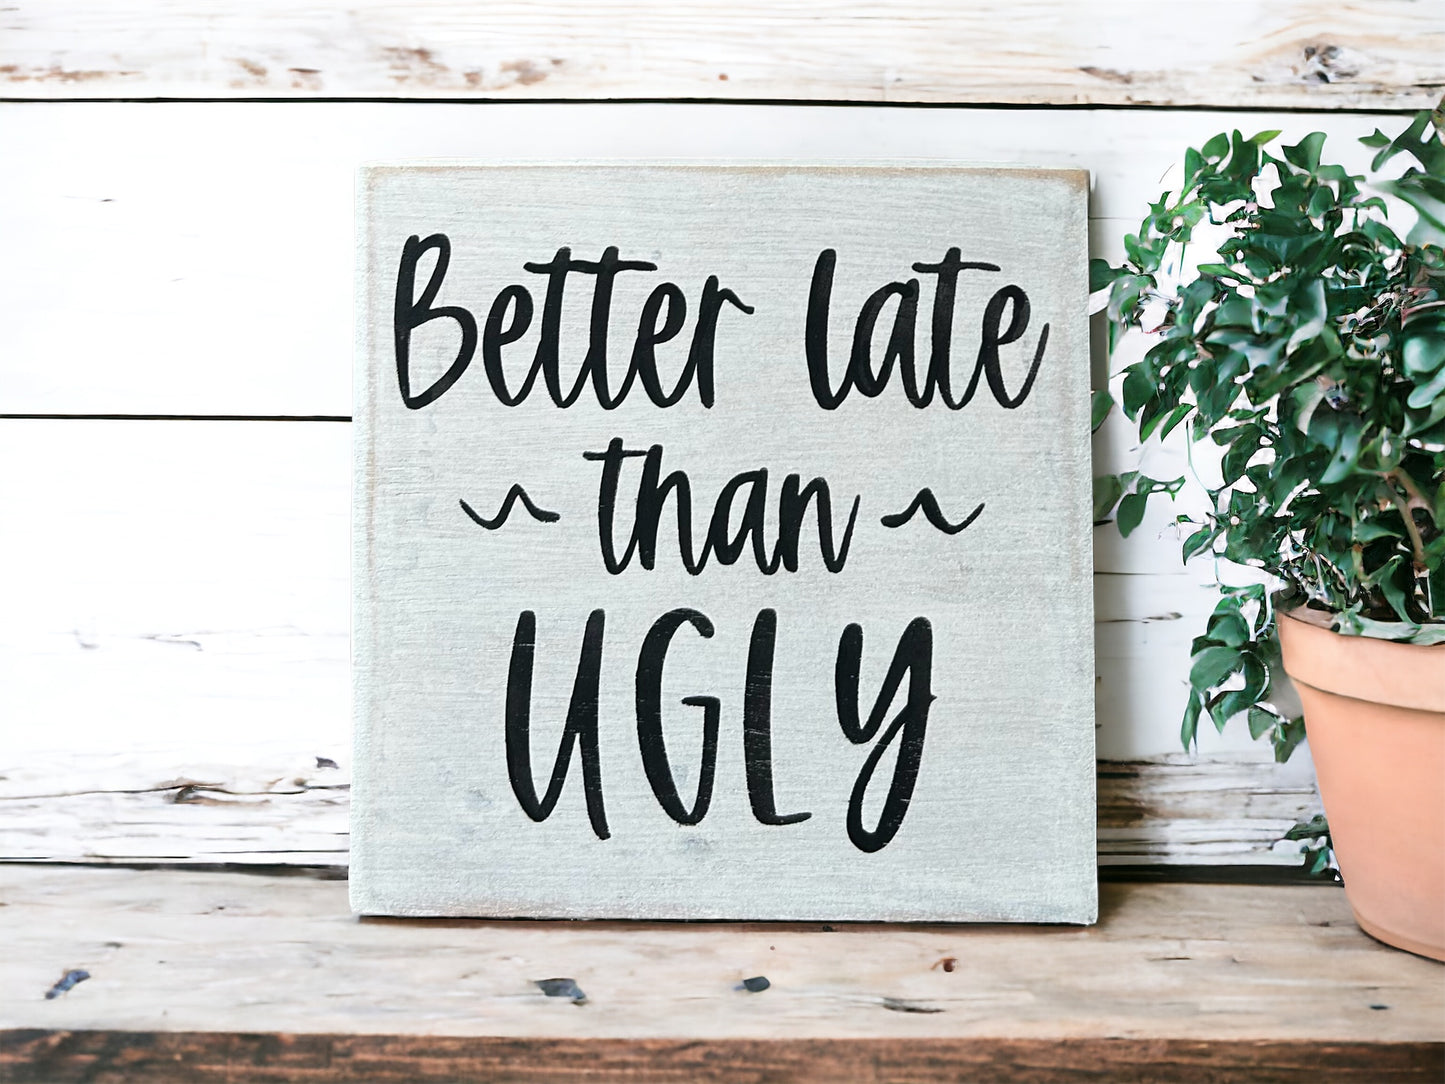 "Better late than ugly" wood sign